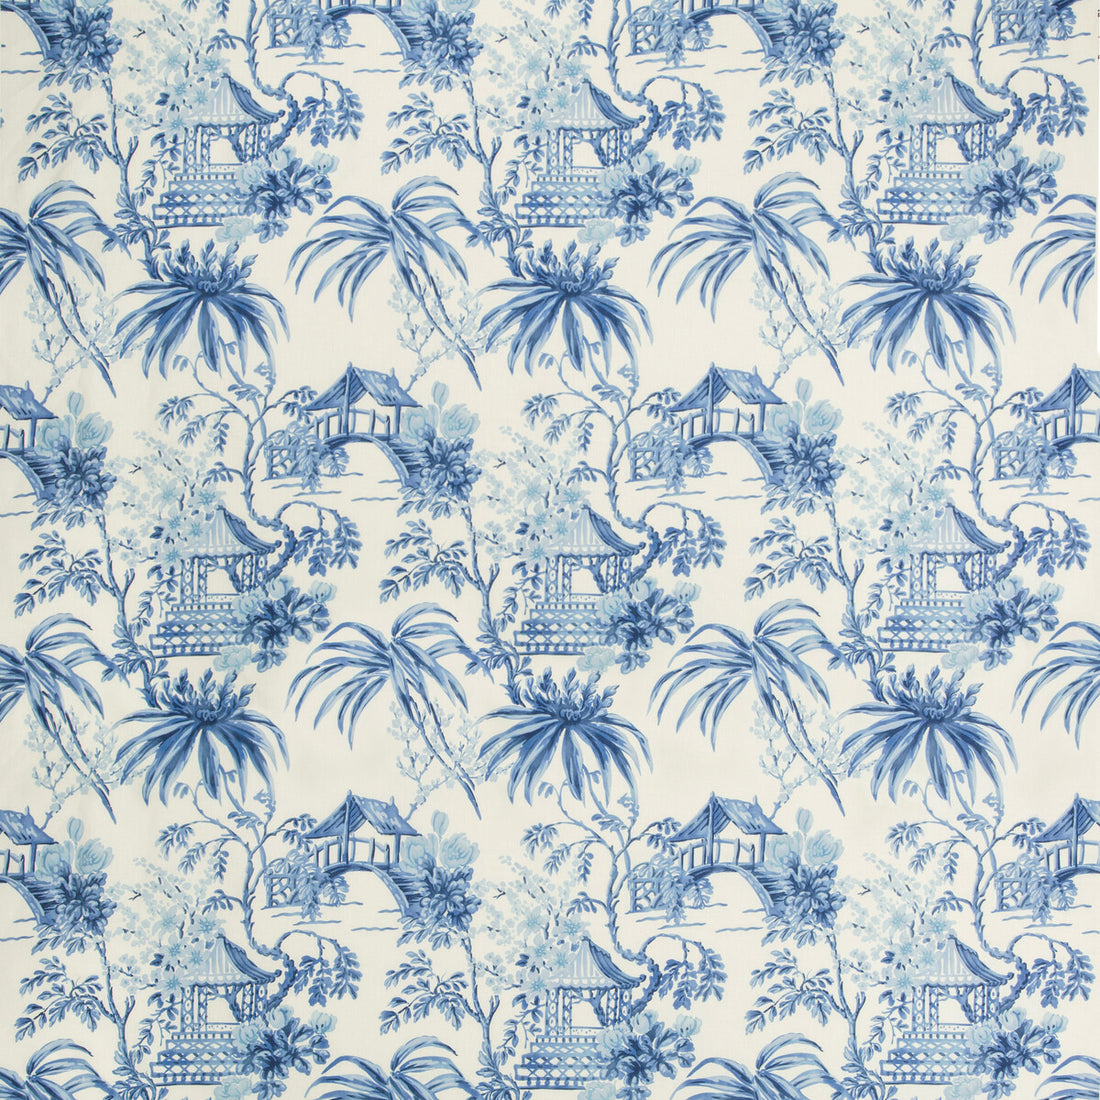 Tongli Print fabric in porcelain color - pattern 8019138.55.0 - by Brunschwig &amp; Fils in the Summer Palace collection